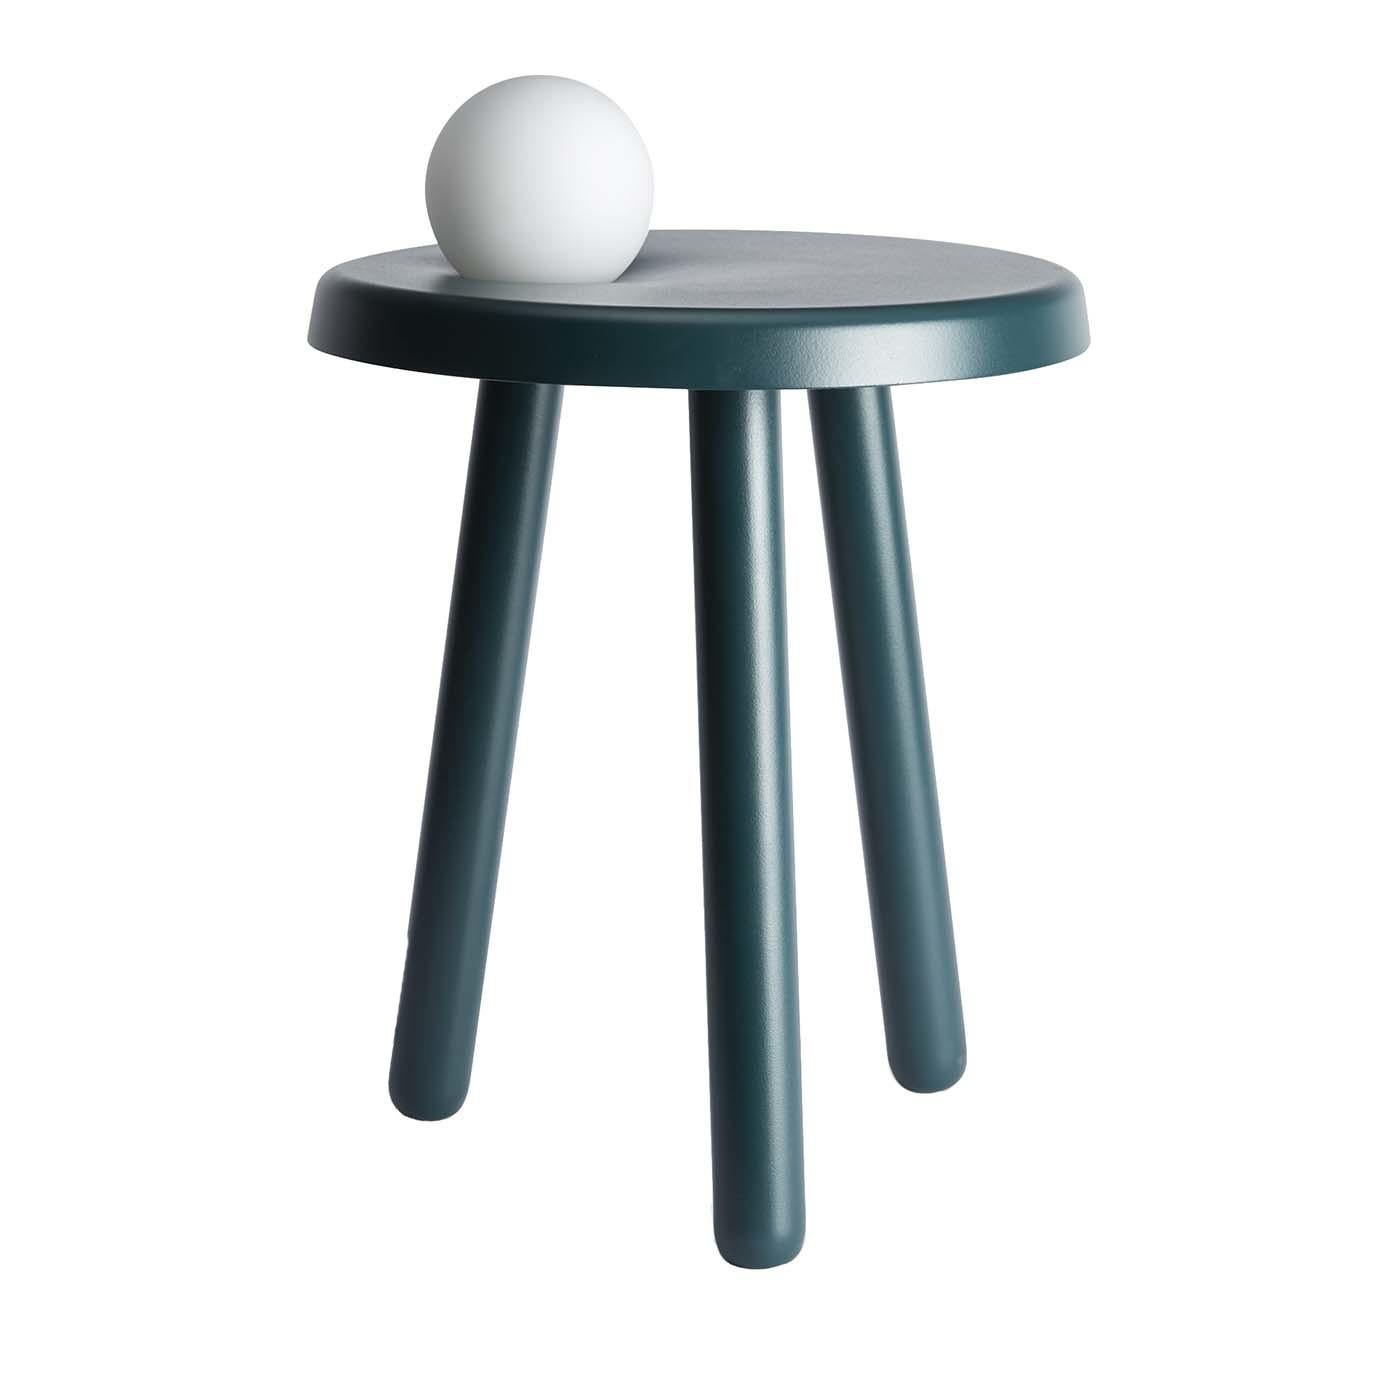 Inspired by Albert Einstein's Theory of Relativity, this side table is an Exclusive Design by Matteo Fiorini for Mason Editions. Crafted of iron in a vivid blue-green color, it features three slanted cylindrical legs with rounded feet. The circular